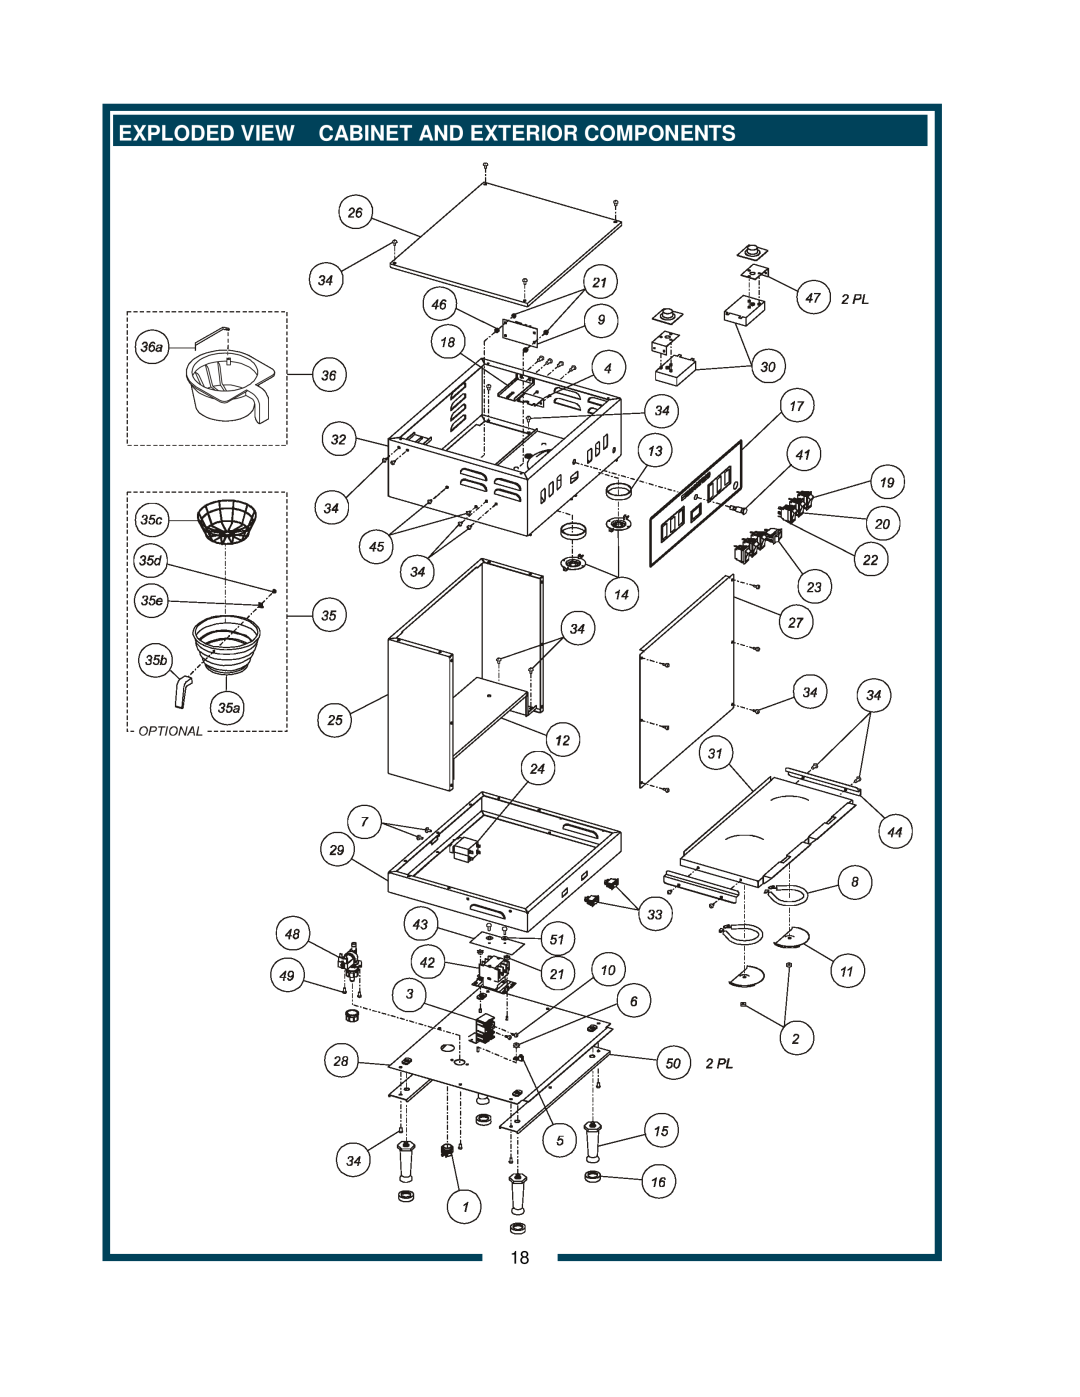 Bloomfield 9220 9221 owner manual Exploded View, Cabinet And Exterior Components 